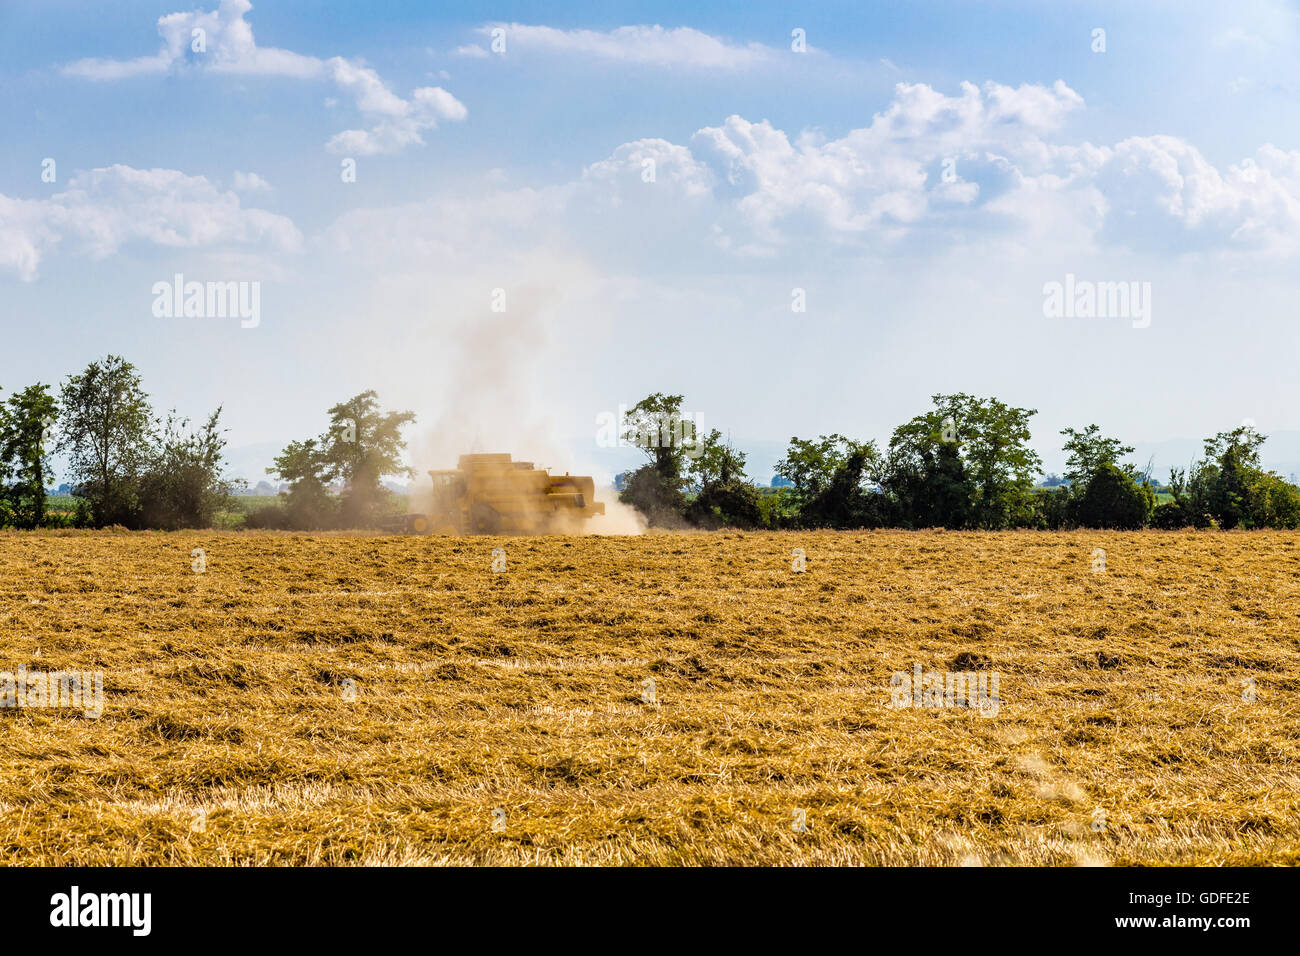 threshing machine in action in a field of wheat makes the harvest on a hot summer day, the harvester is in the background enveloped in a cloud of dust Stock Photo